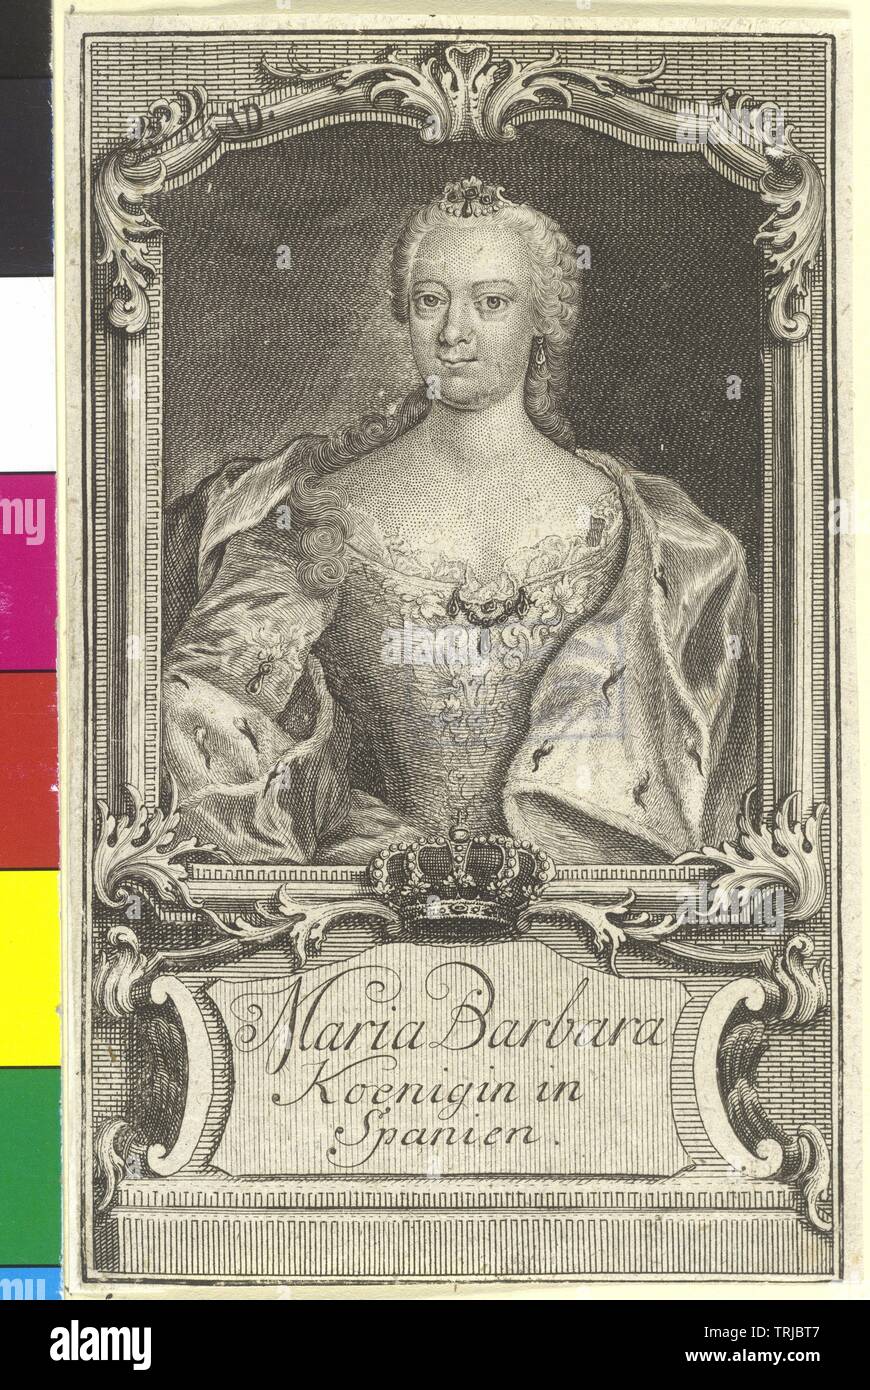 Maria Barbara, Infanta of Portugal, Additional-Rights-Clearance-Info-Not-Available Stock Photo